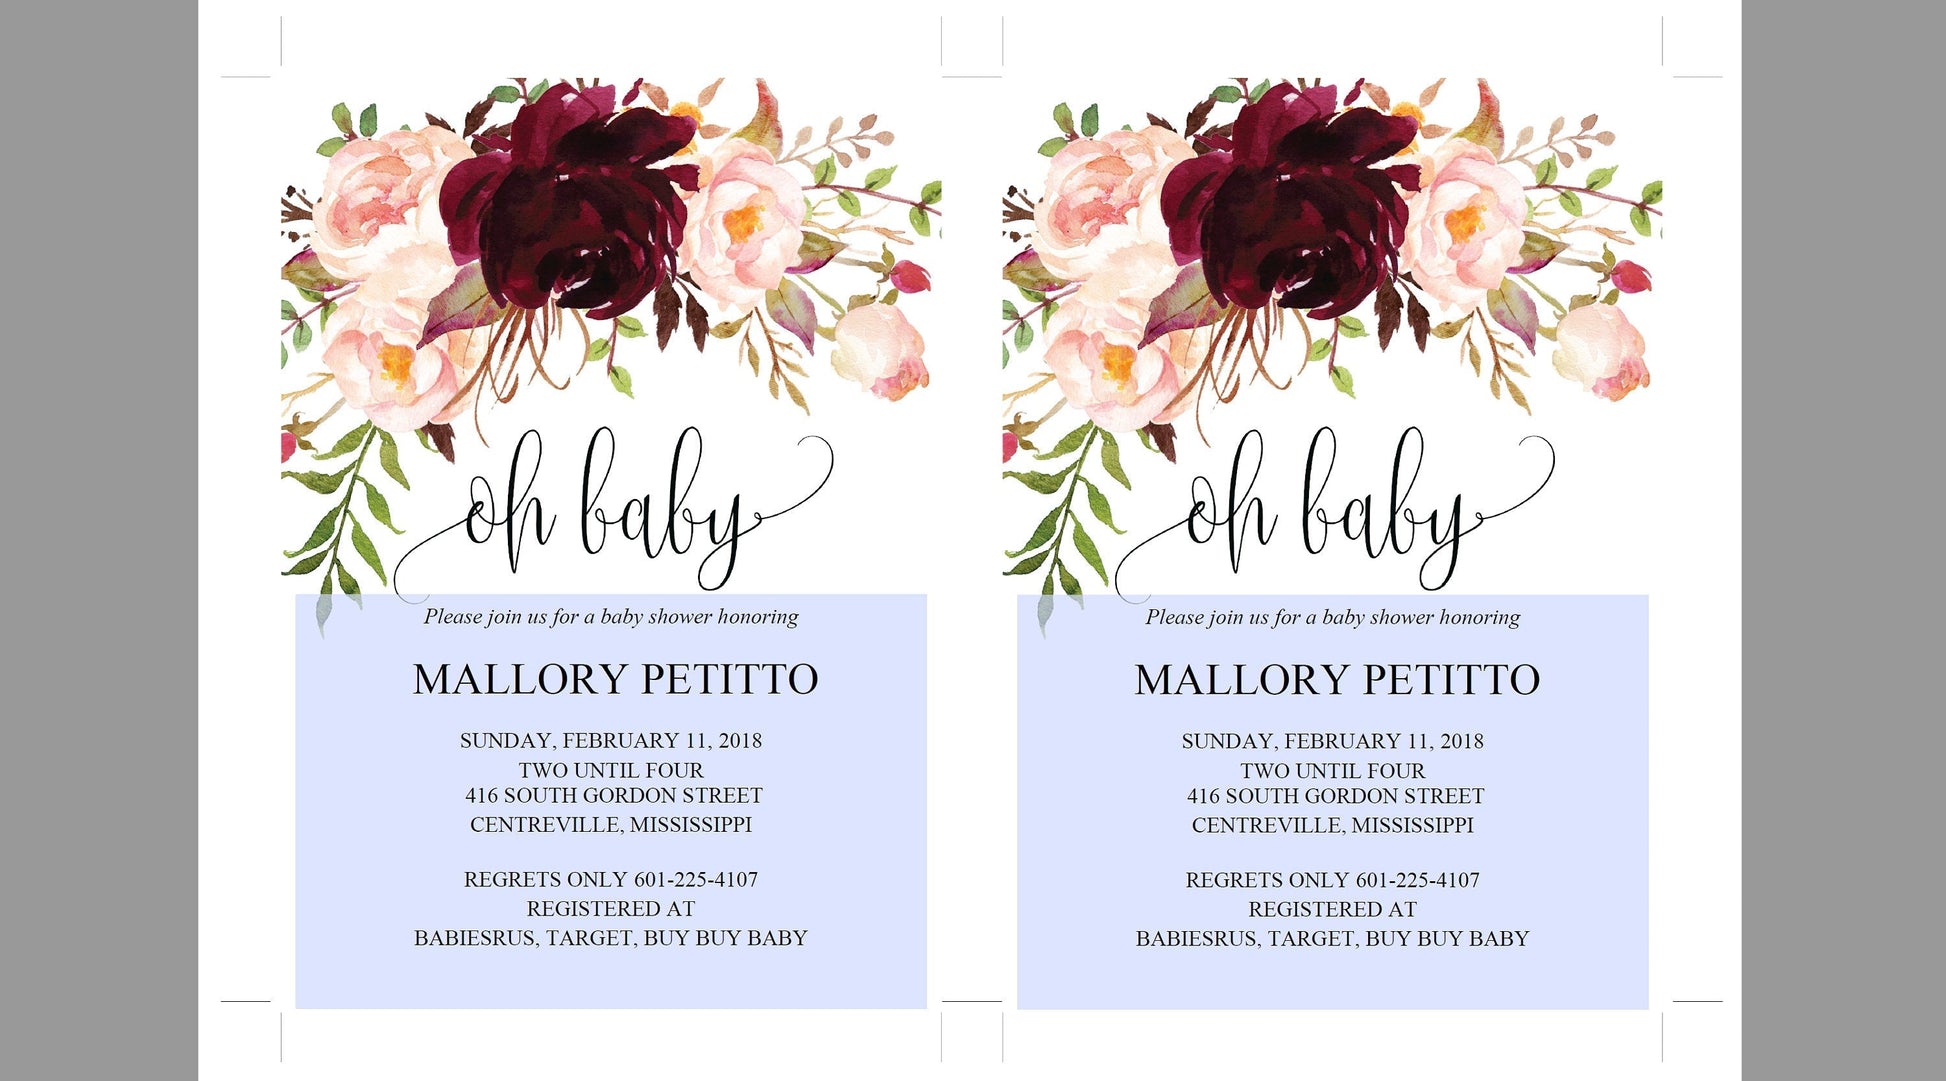 Baby Shower Invitation Template, Oh Baby, Baby Shower invite, Baby Shower Invites - MPU78  SAVVY PAPER CO